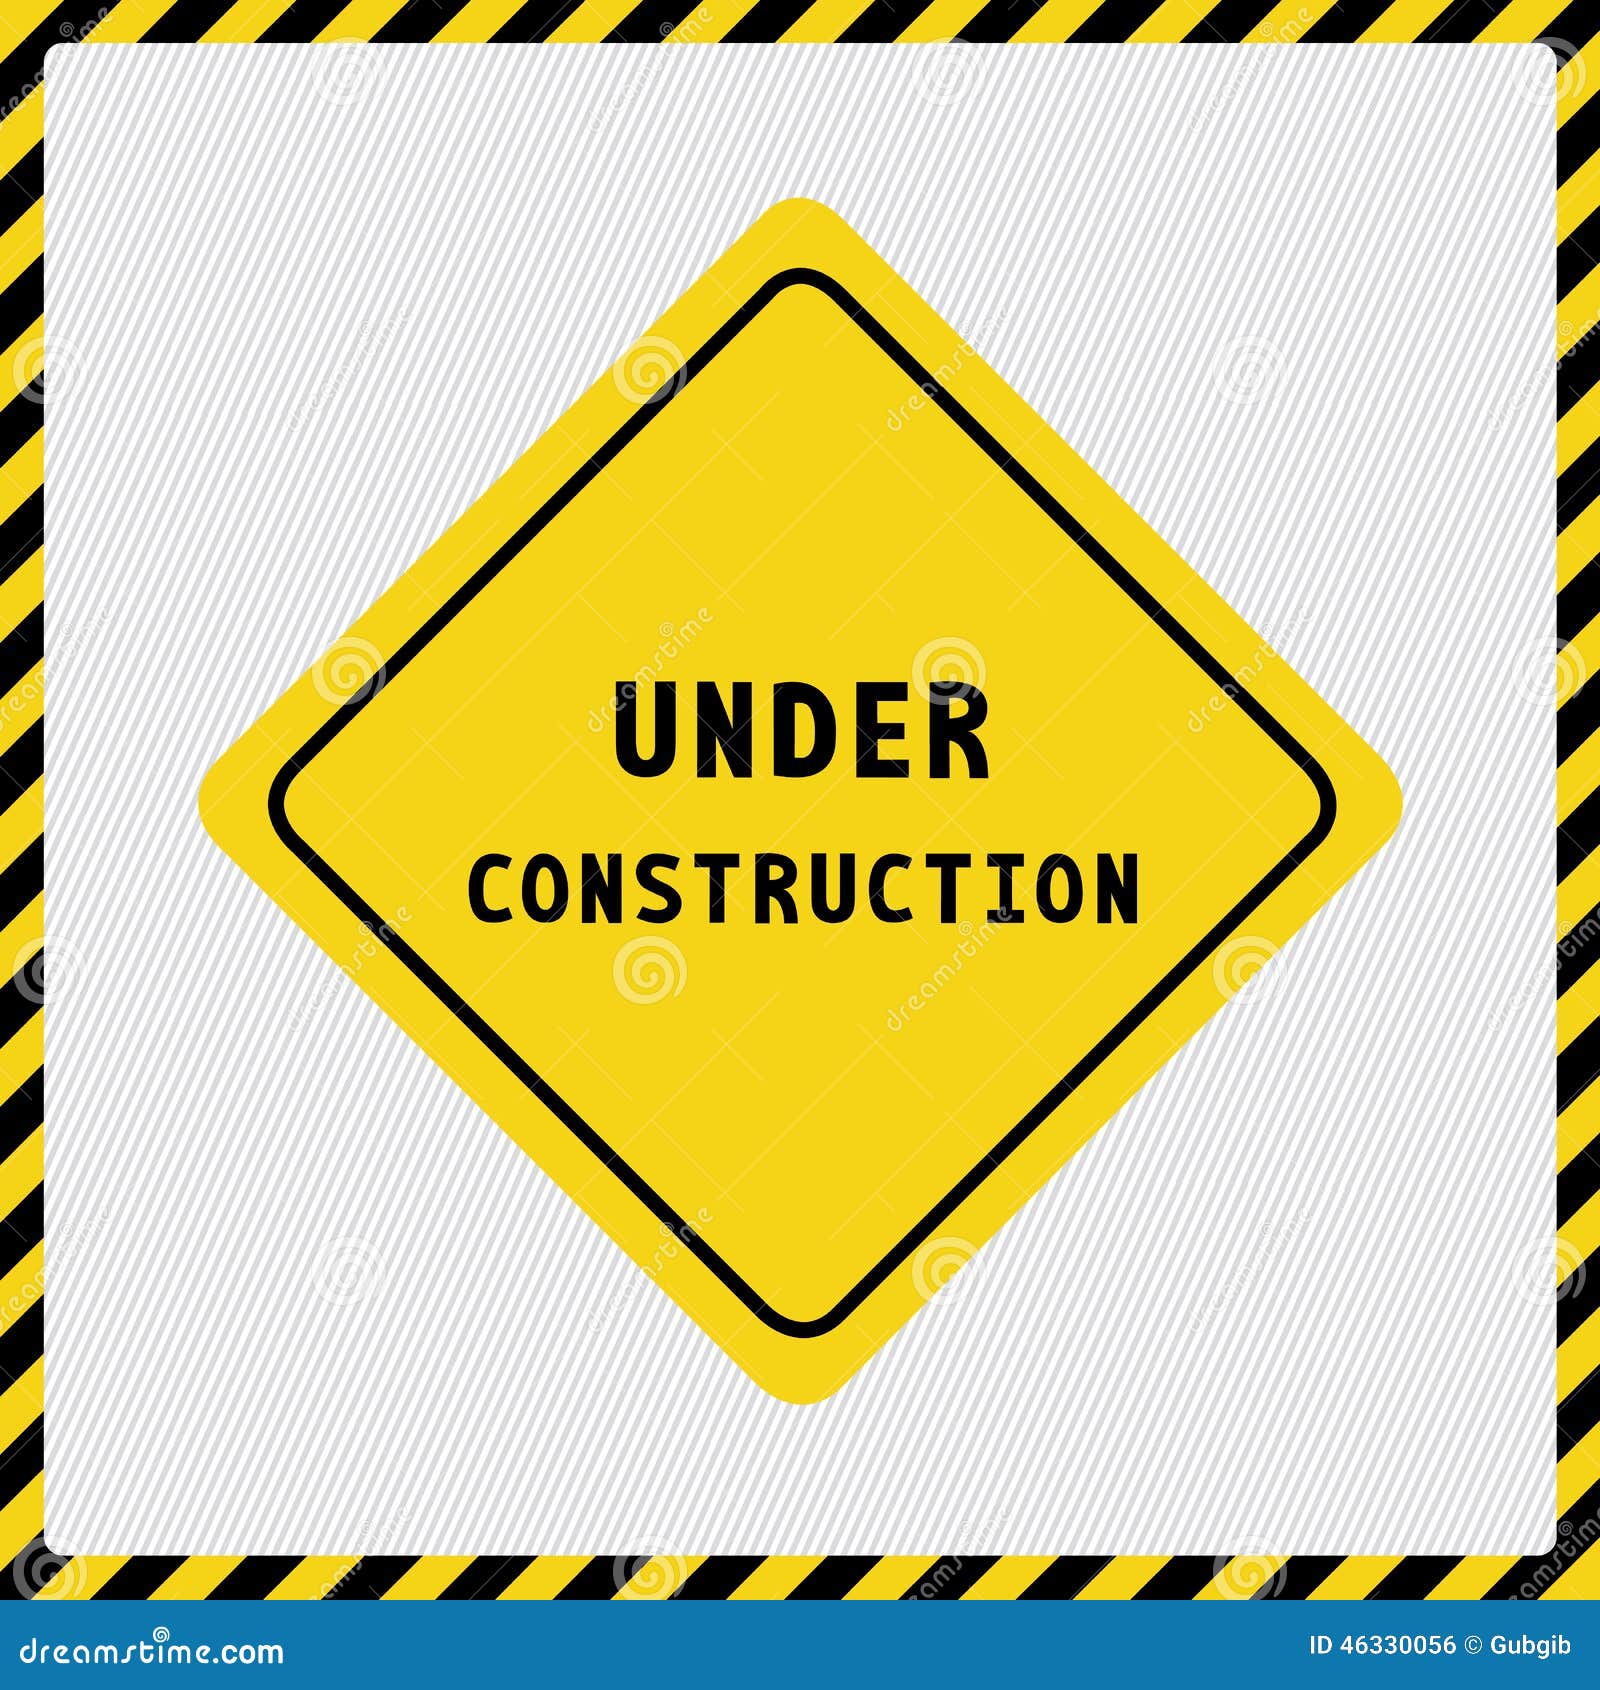 Under Construction Sign2 Stock Vector - Image: 46330056